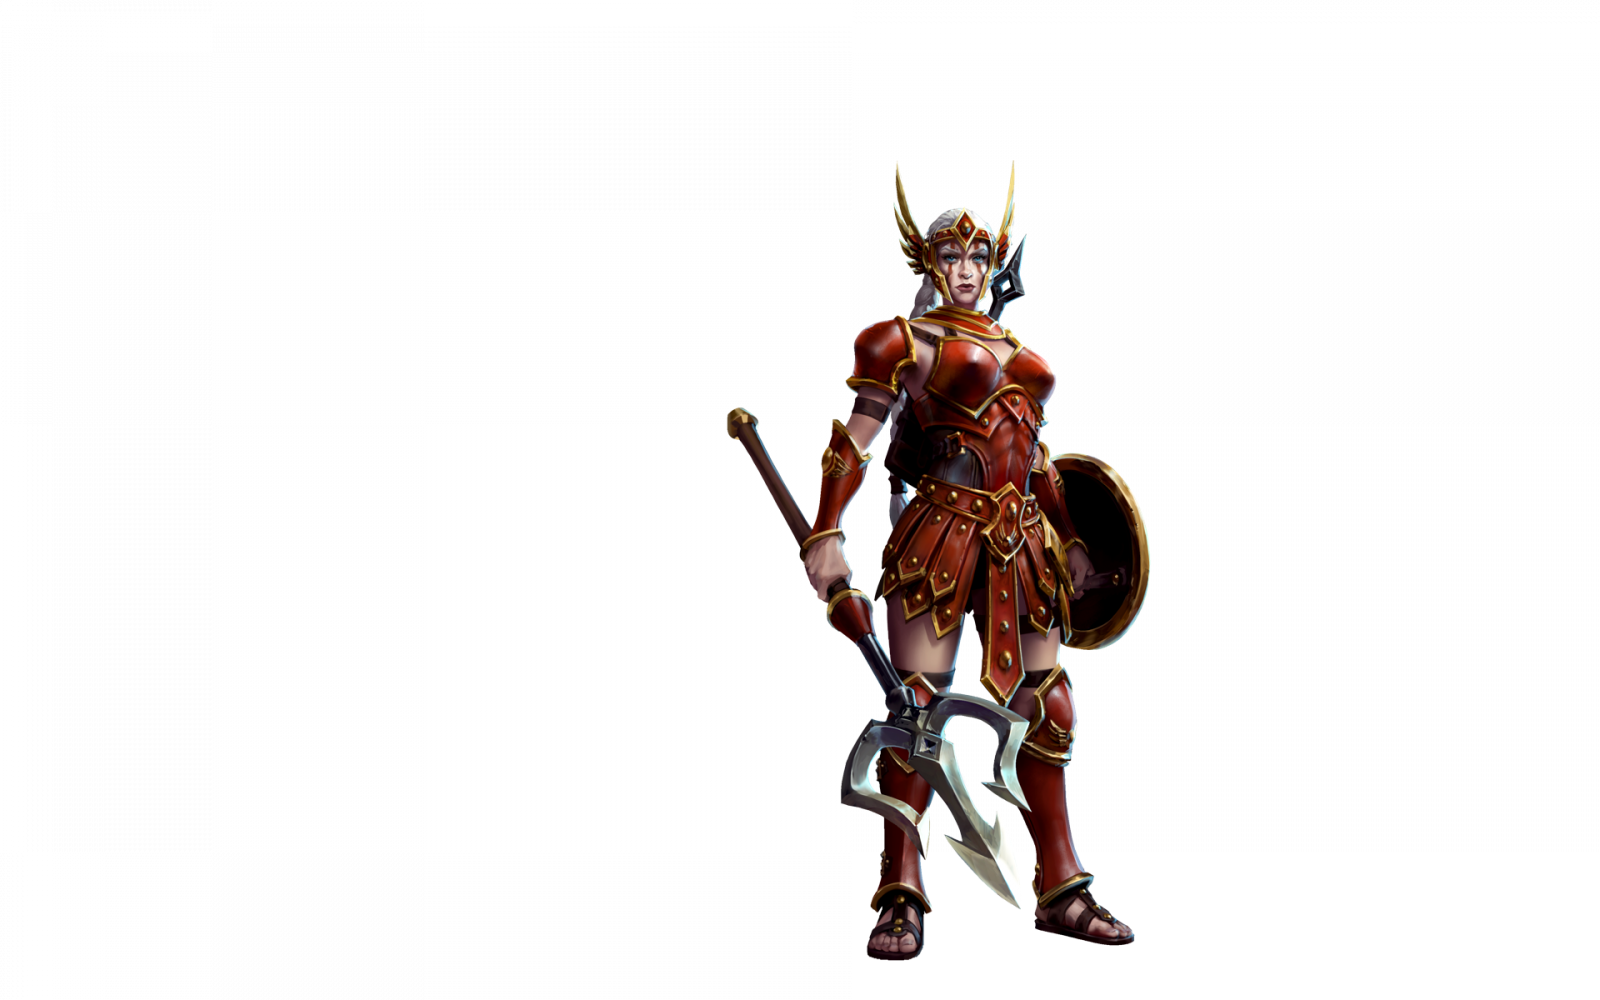 miss-the-amazon-class-from-diablo-ii-well-cassia-is-the-clos_jjy2.1920.png